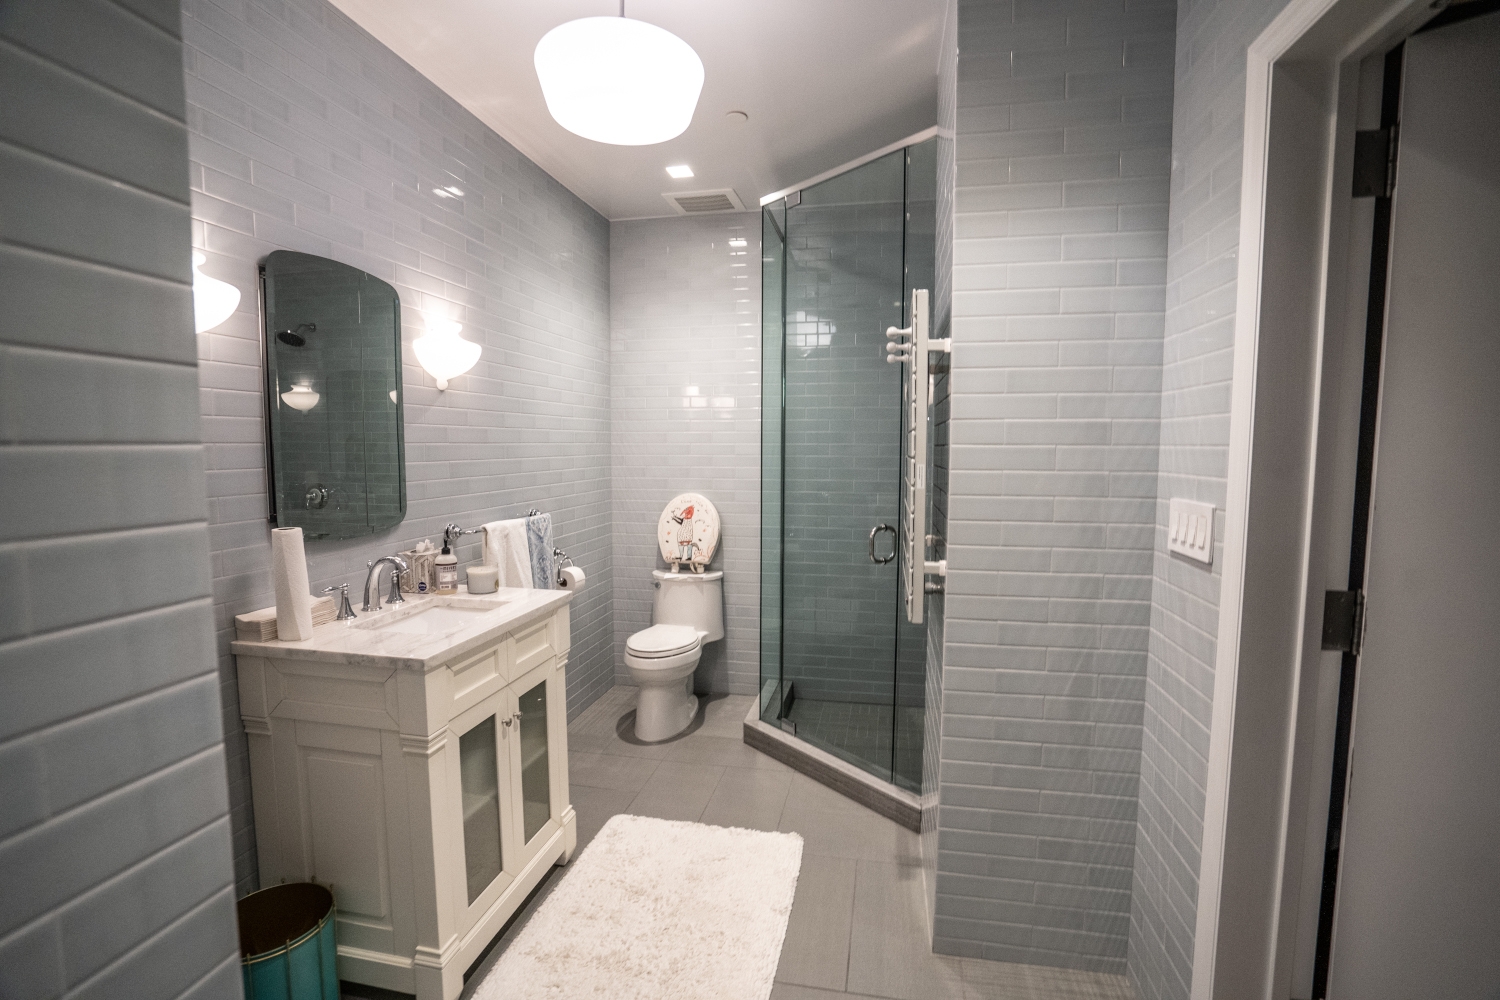 Renovated bathroom in a home showcasing a spacious walk-in shower, new wall and floor tiles, and modern fixtures